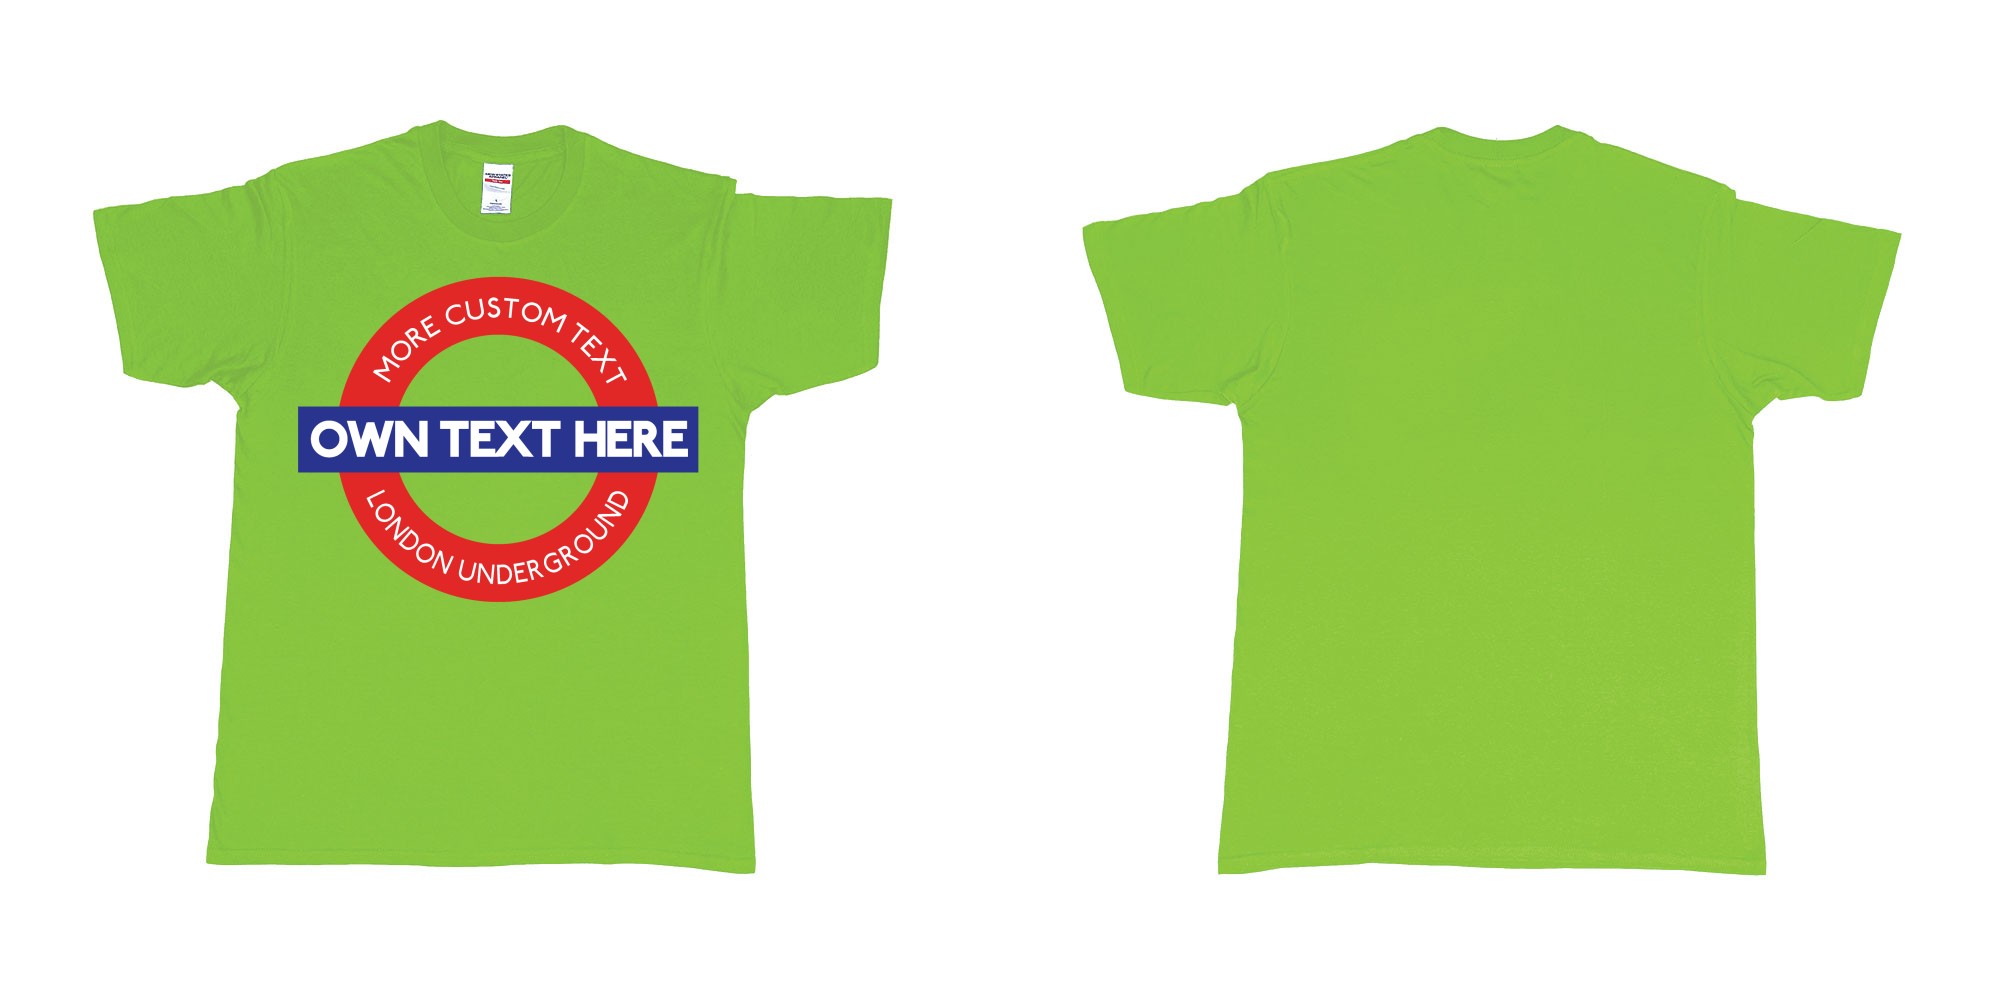 Custom tshirt design london underground logo custom design in fabric color lime choice your own text made in Bali by The Pirate Way